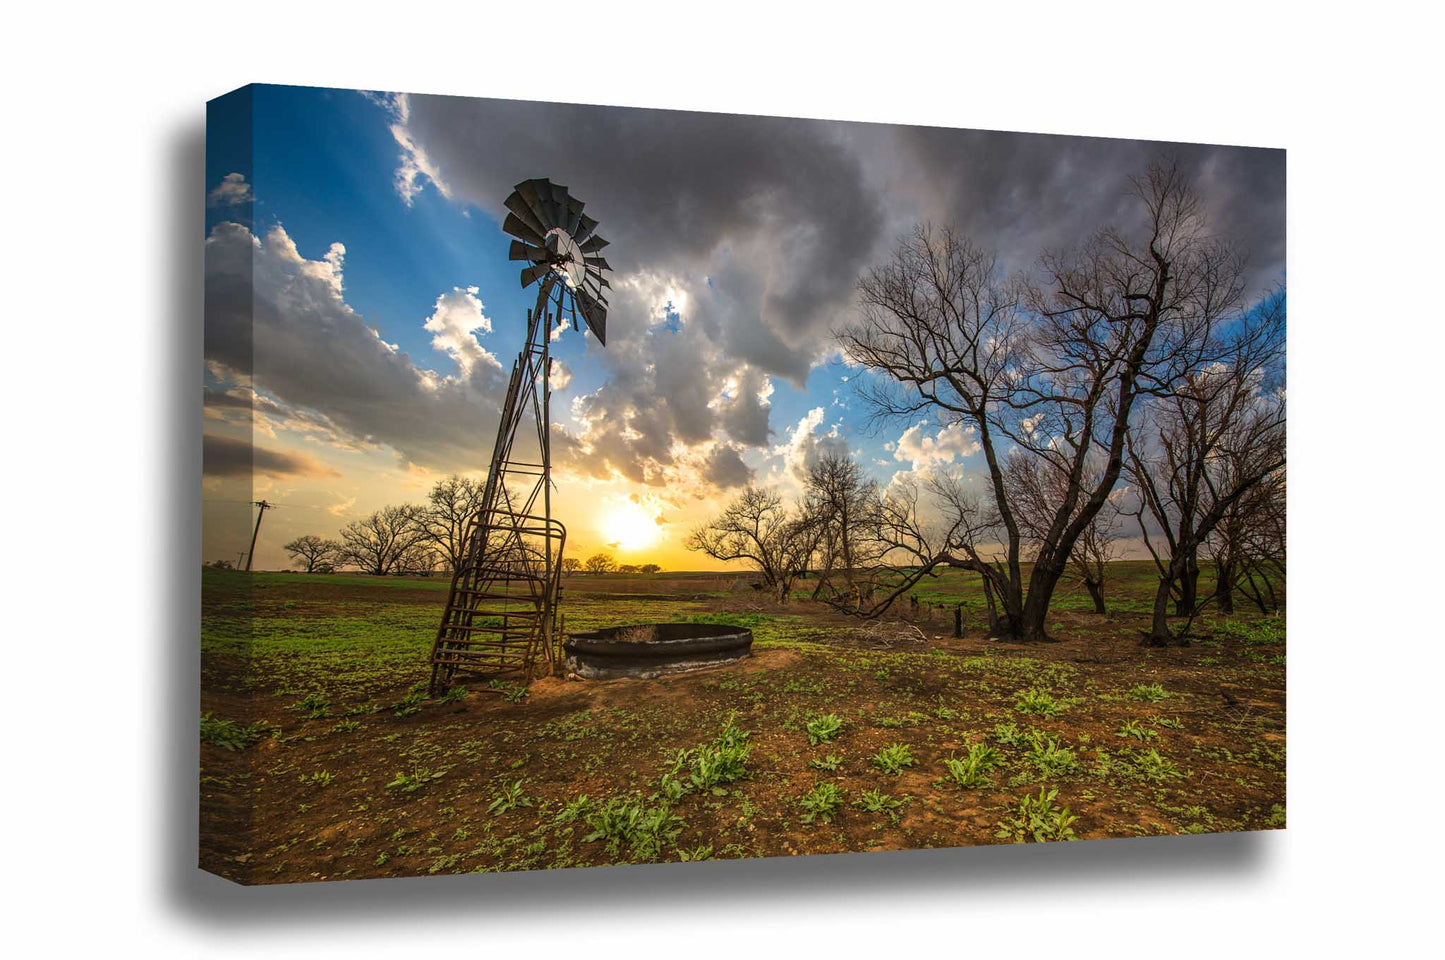 Country canvas wall art of an old windmill and charred trees at sunset on a spring evening in Kansas by Sean Ramsey of Southern Plains Photography.